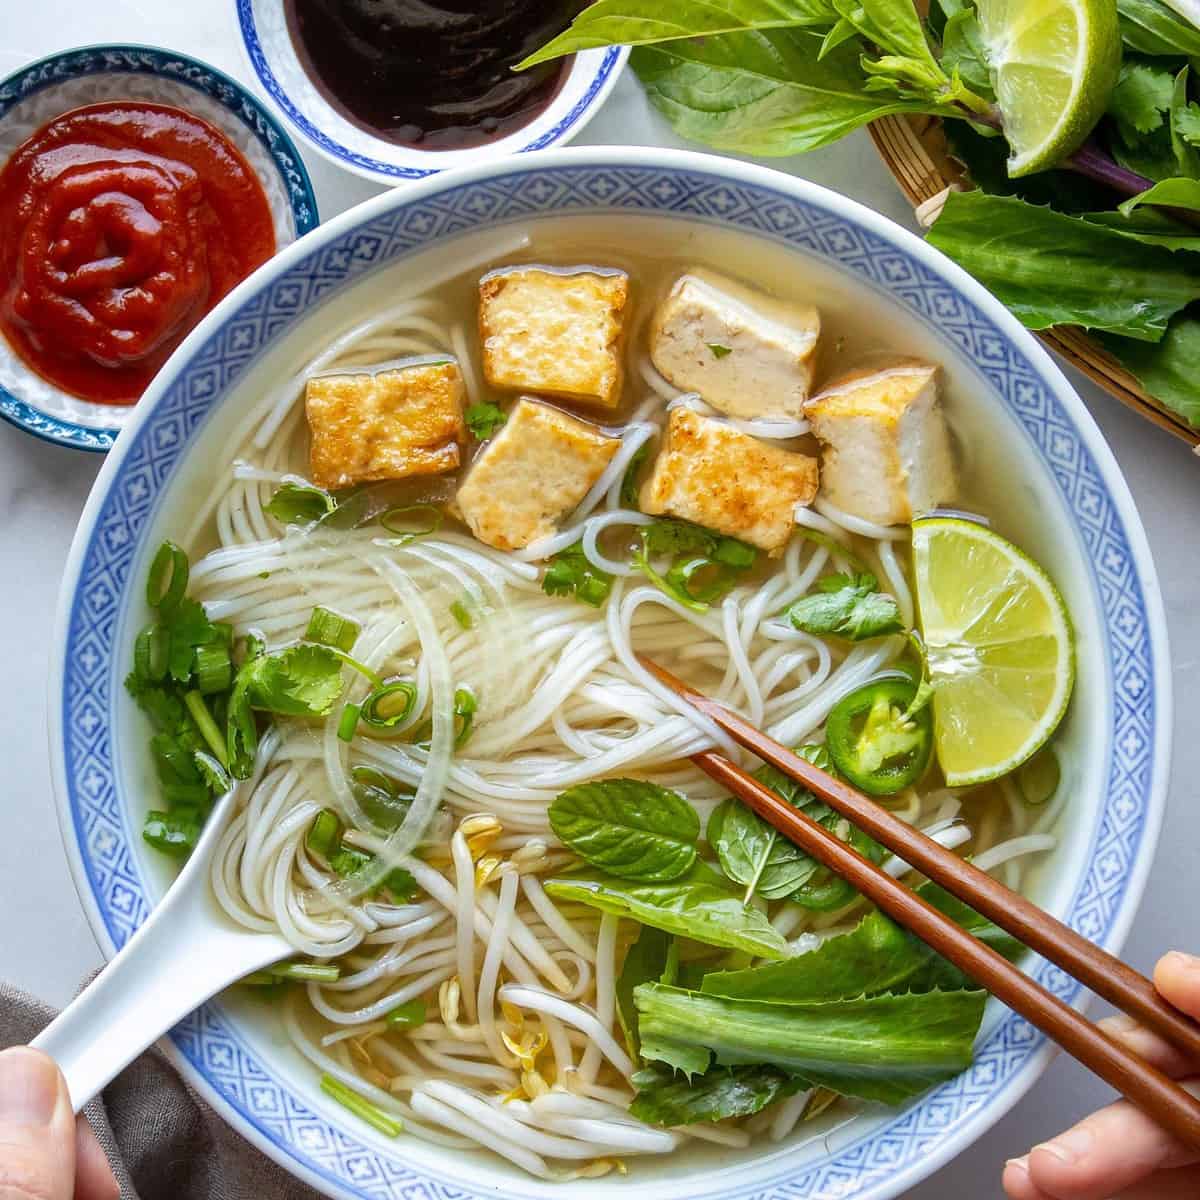  The bold flavors of lemongrass and ginger make this broth irresistibly mouth-watering.